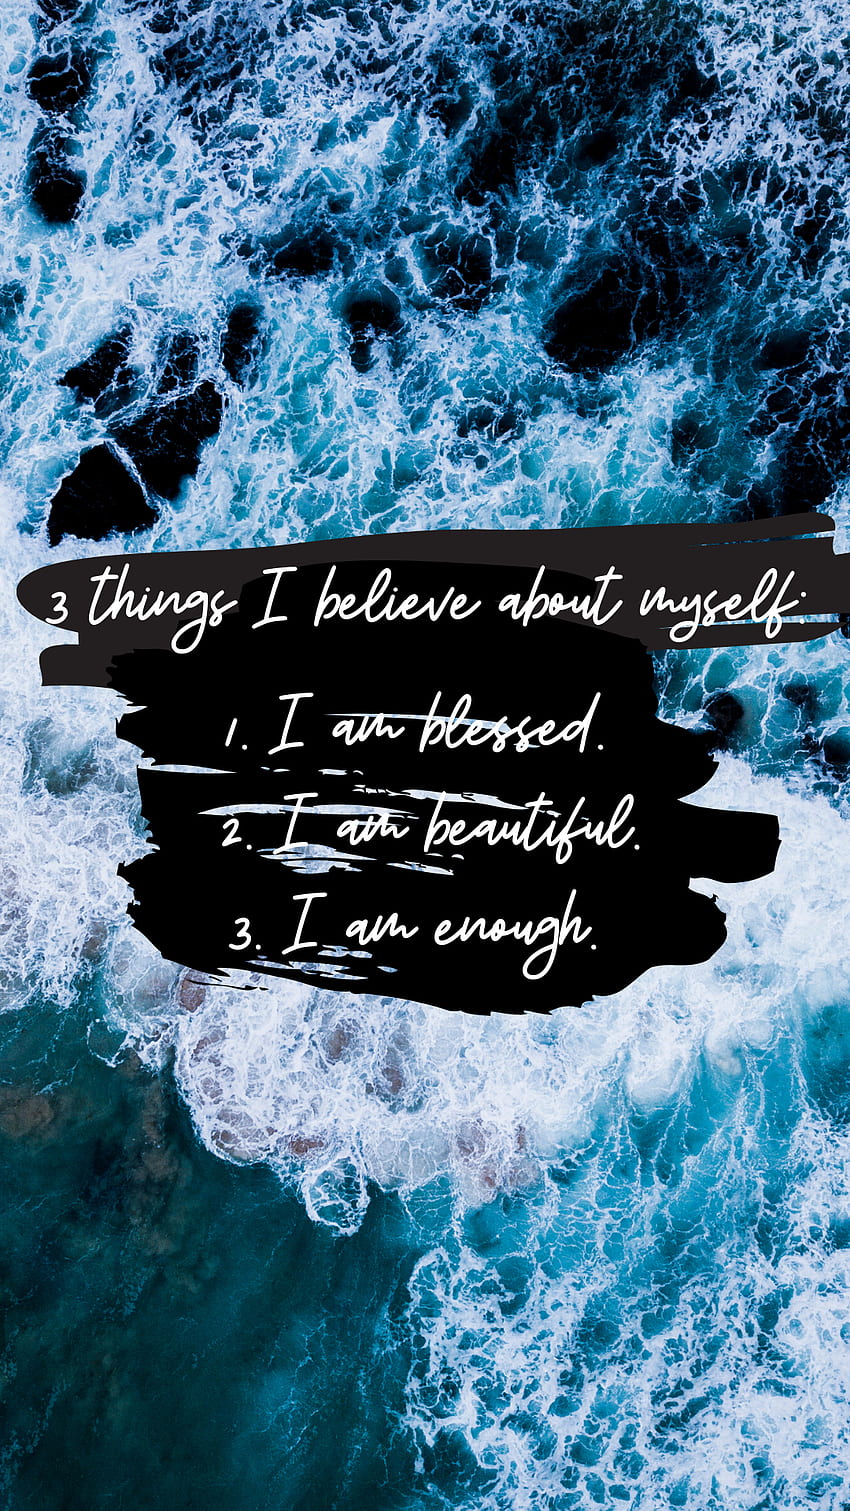 Inspiring Phone . Personal growth quotes, I AM Enough HD phone wallpaper